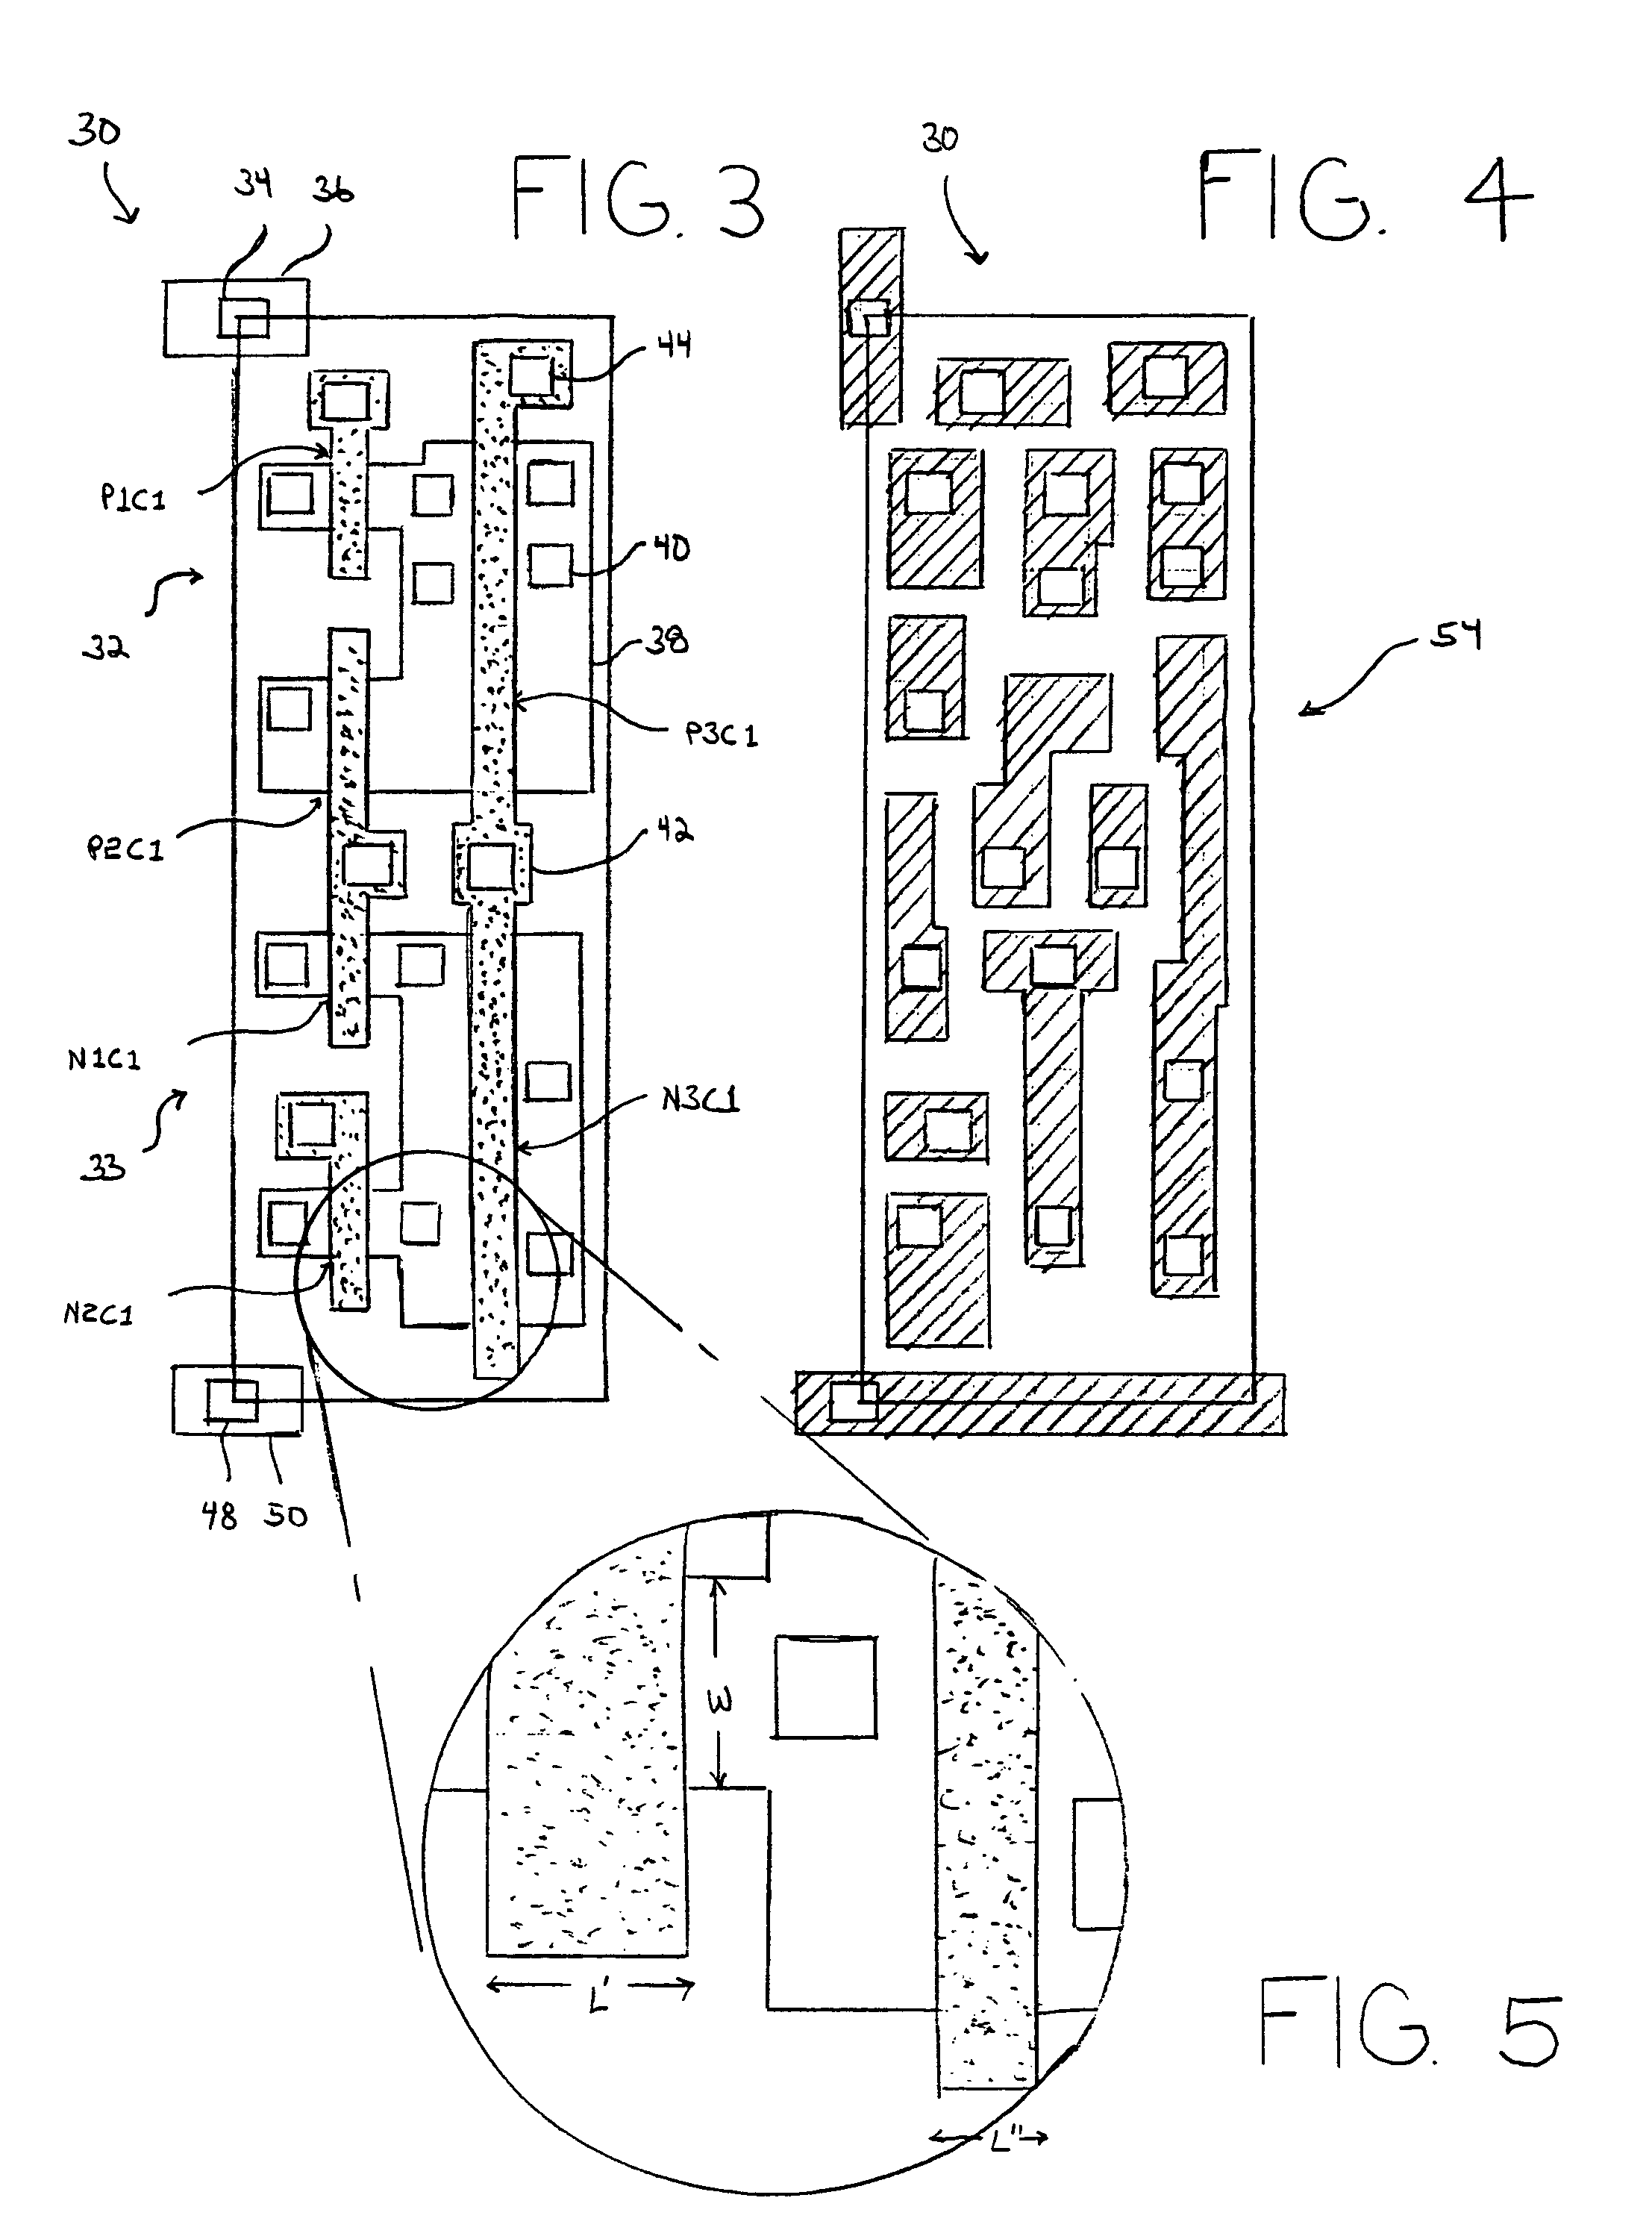 Integrated circuit cell architecture configurable for memory or logic elements